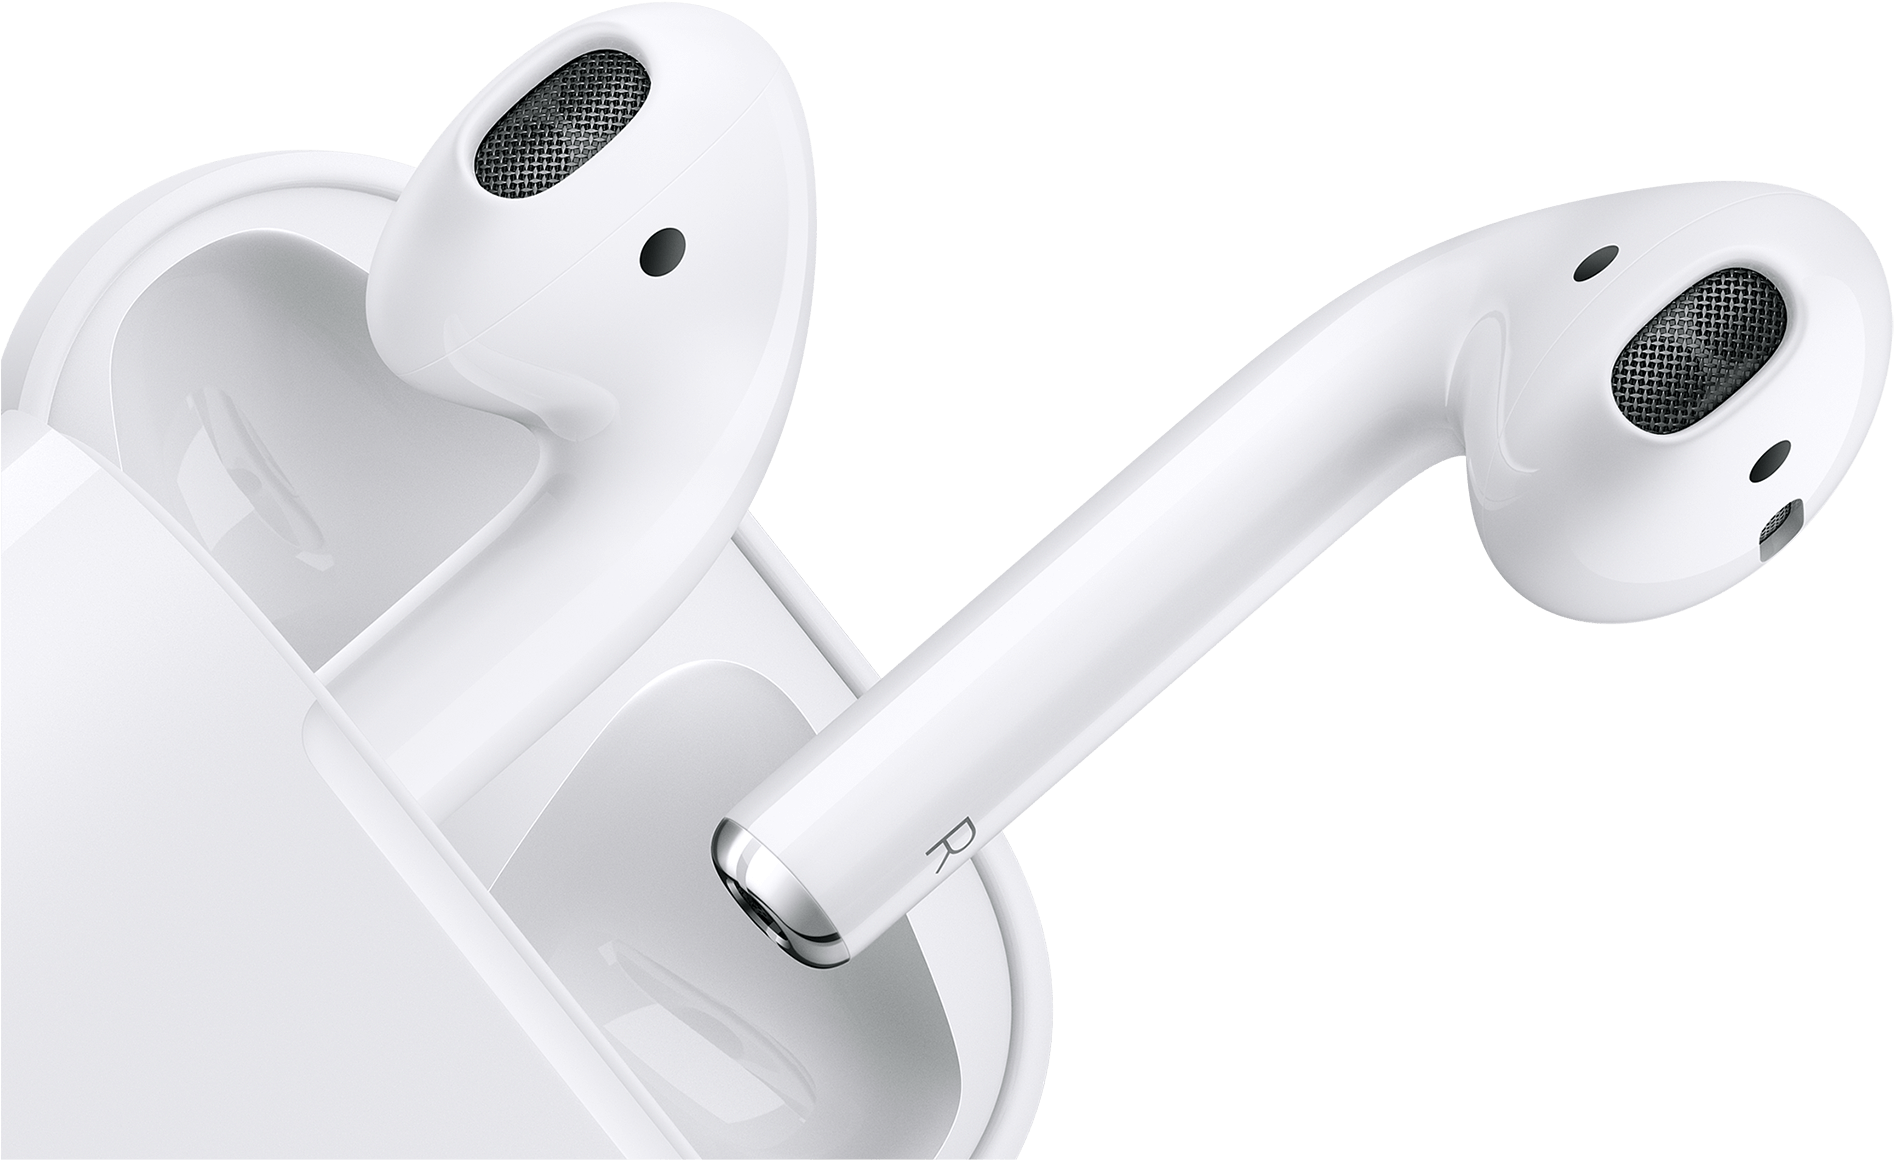 Download Airpods No Background Png : Search more high quality free transparent png images on pngkey.com ...